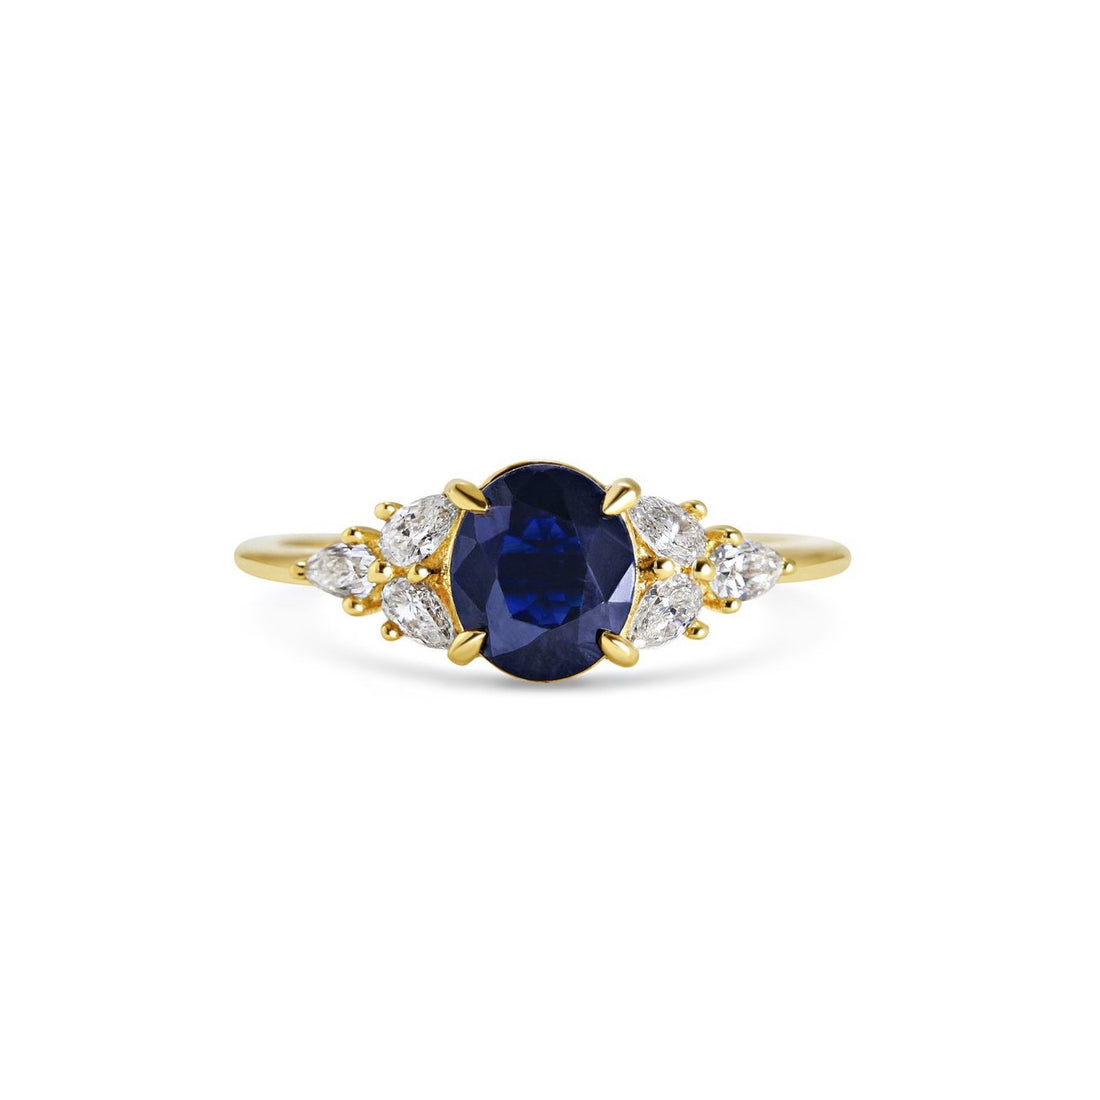  Sapphire & Diamond Ring by Michelle Oh | The Cut London